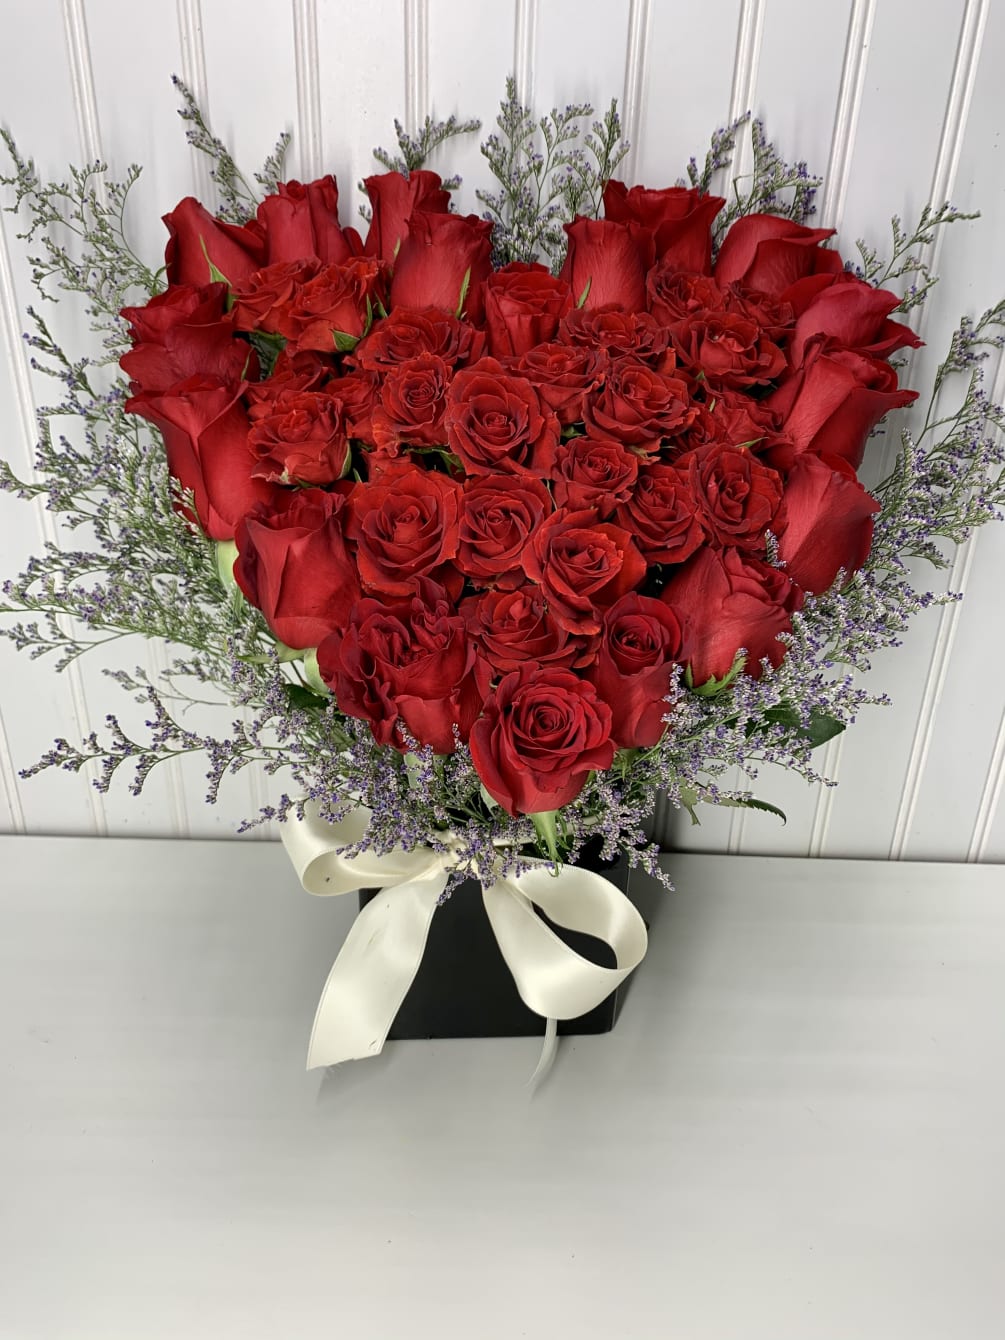 A lovely heart arrangement with roses  and cymbidium orchids